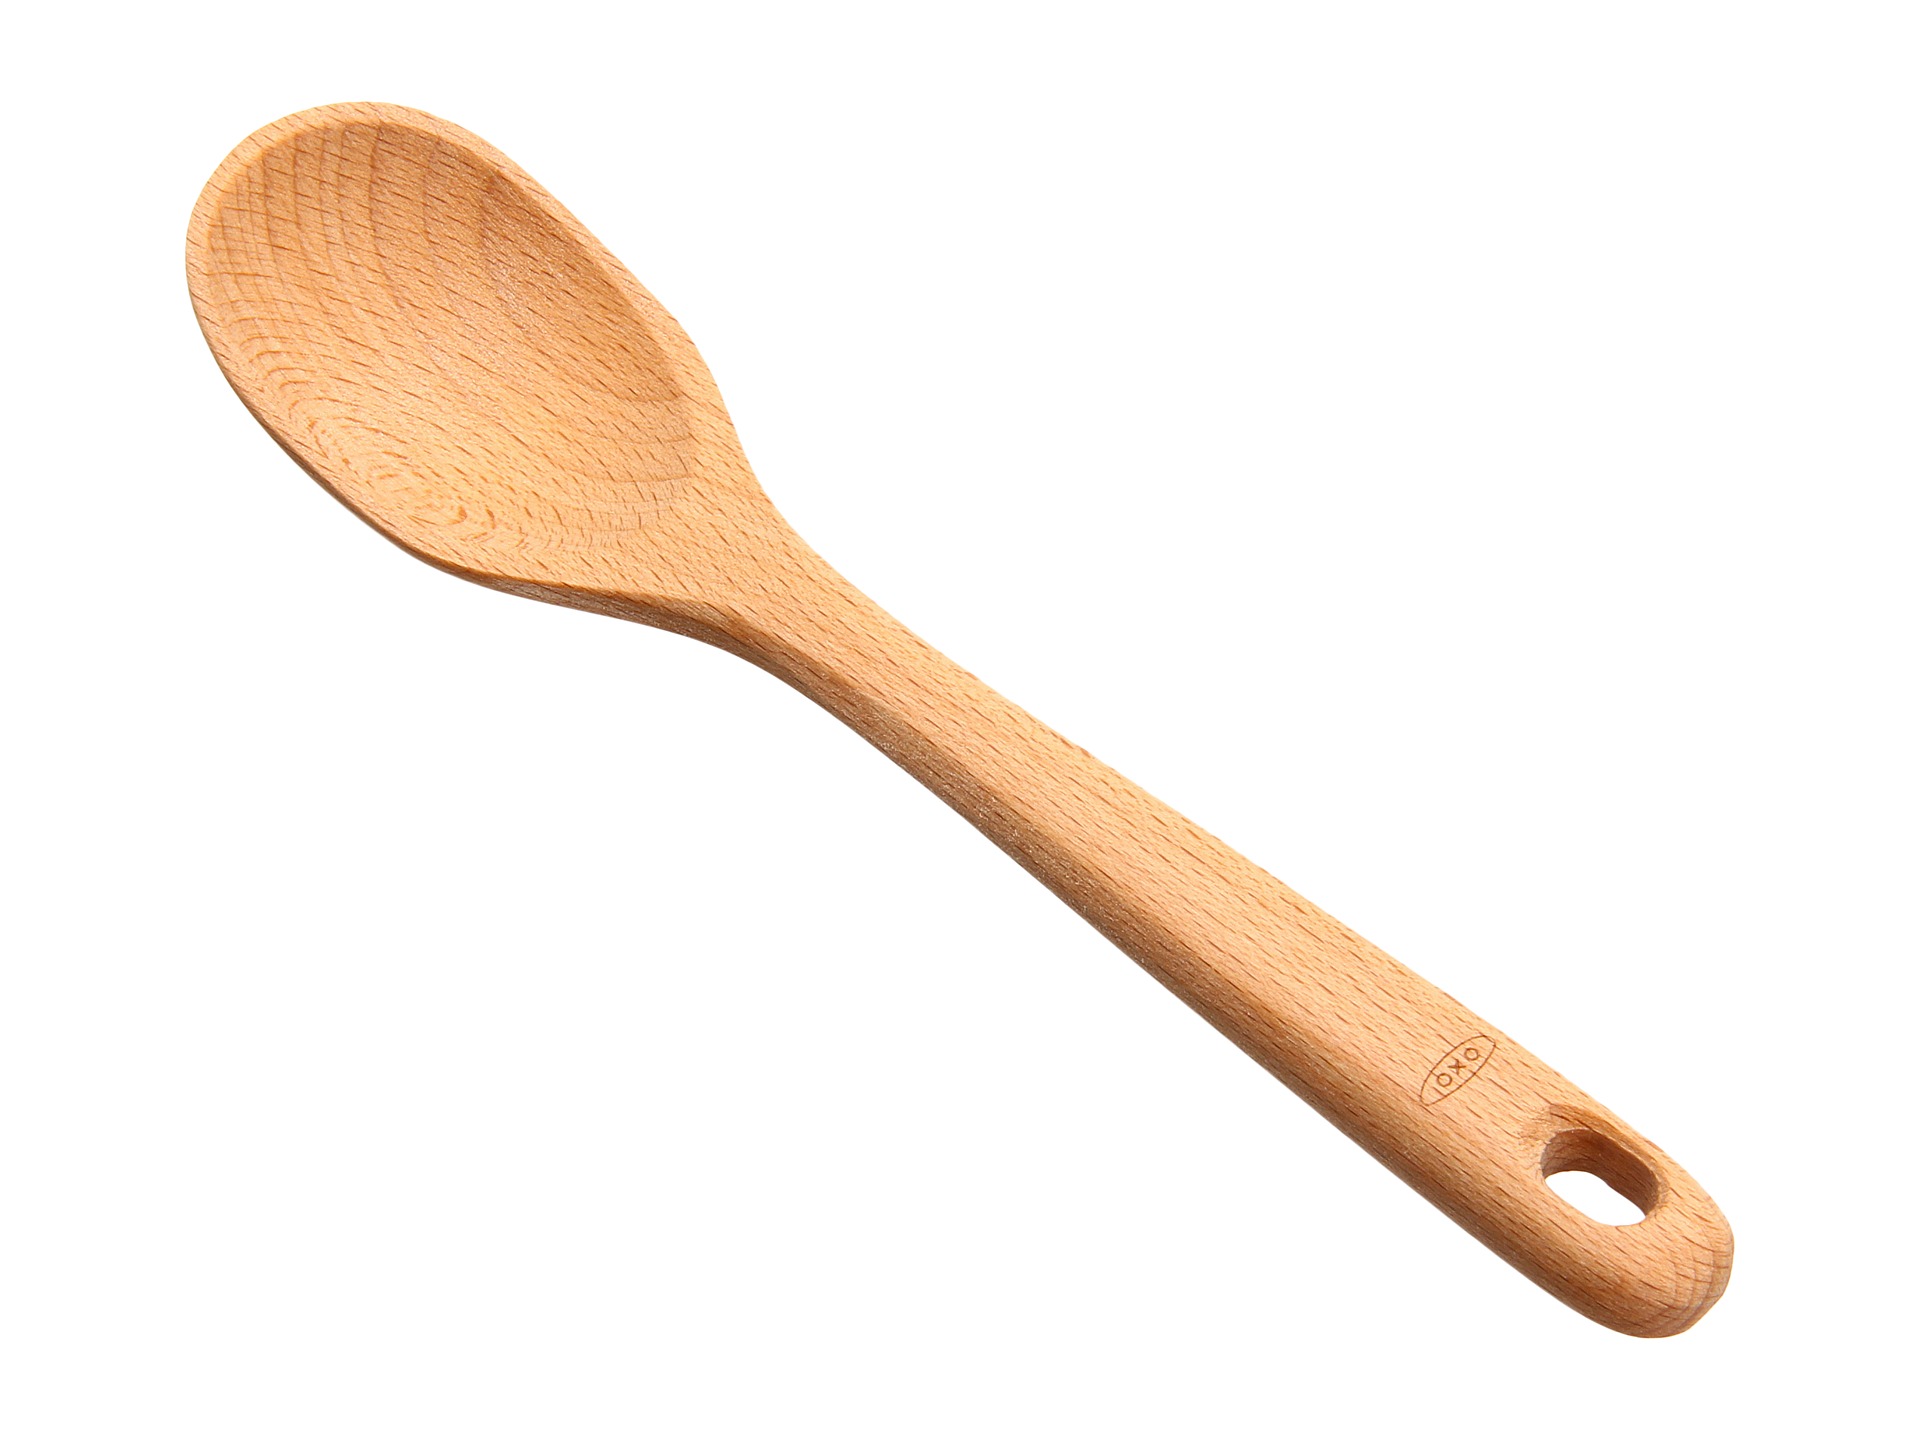 Oxo Good Grips 3 Piece Wooden Spoon Set | Shipped Free at ...